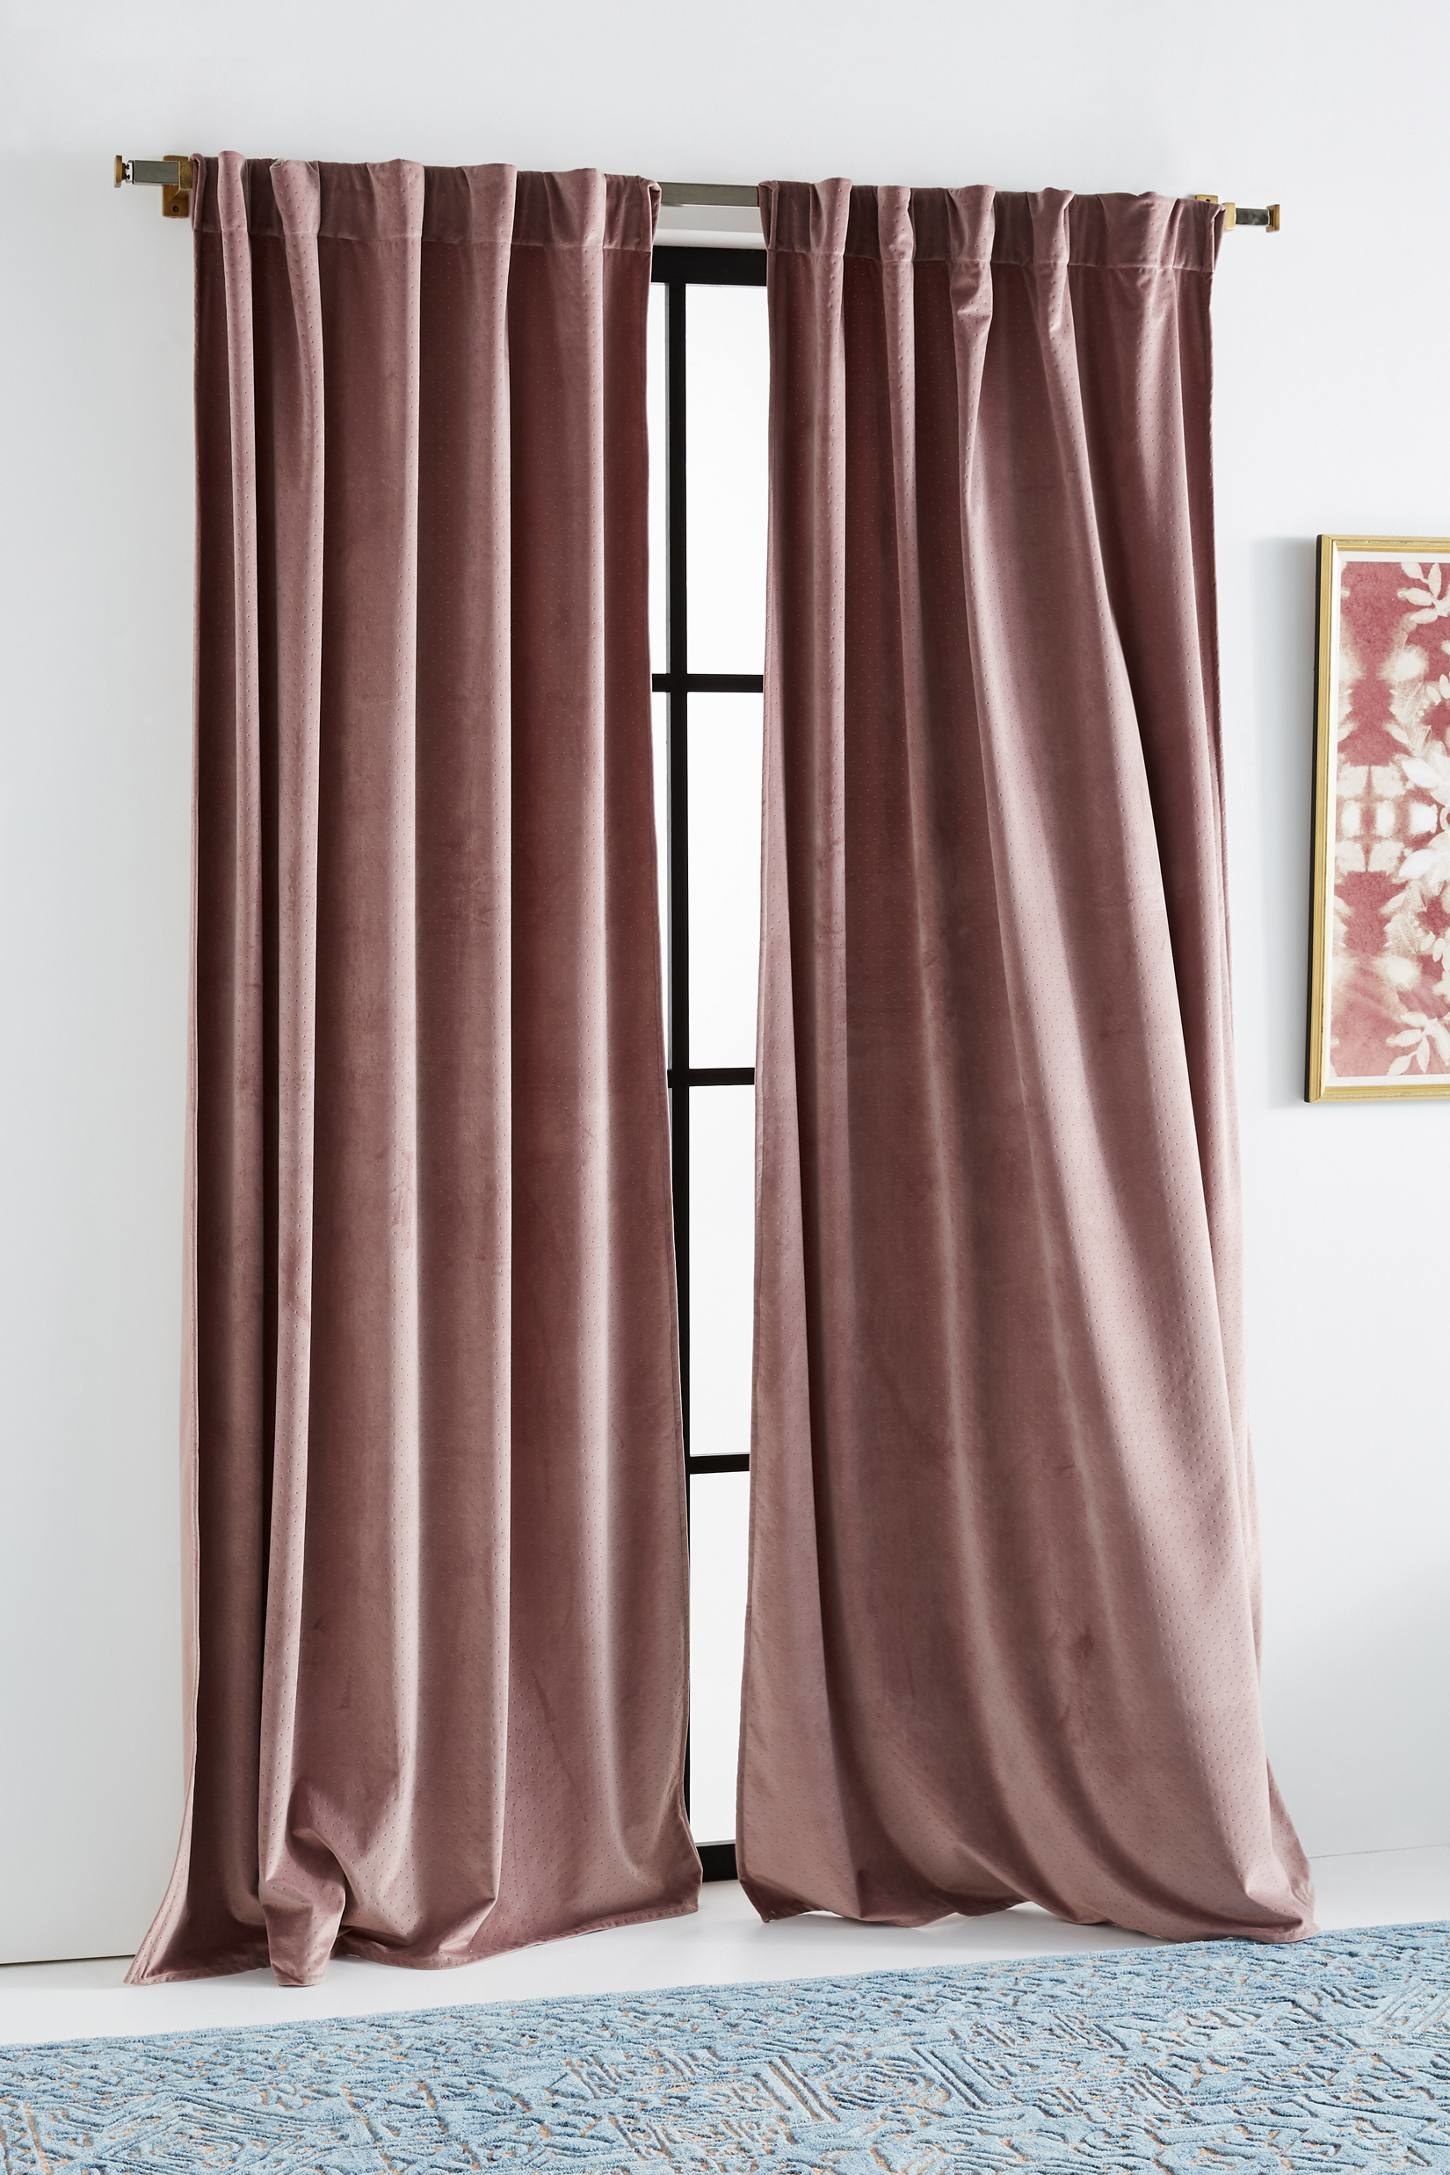 a set of dusty pink velvet curtains hung above a window